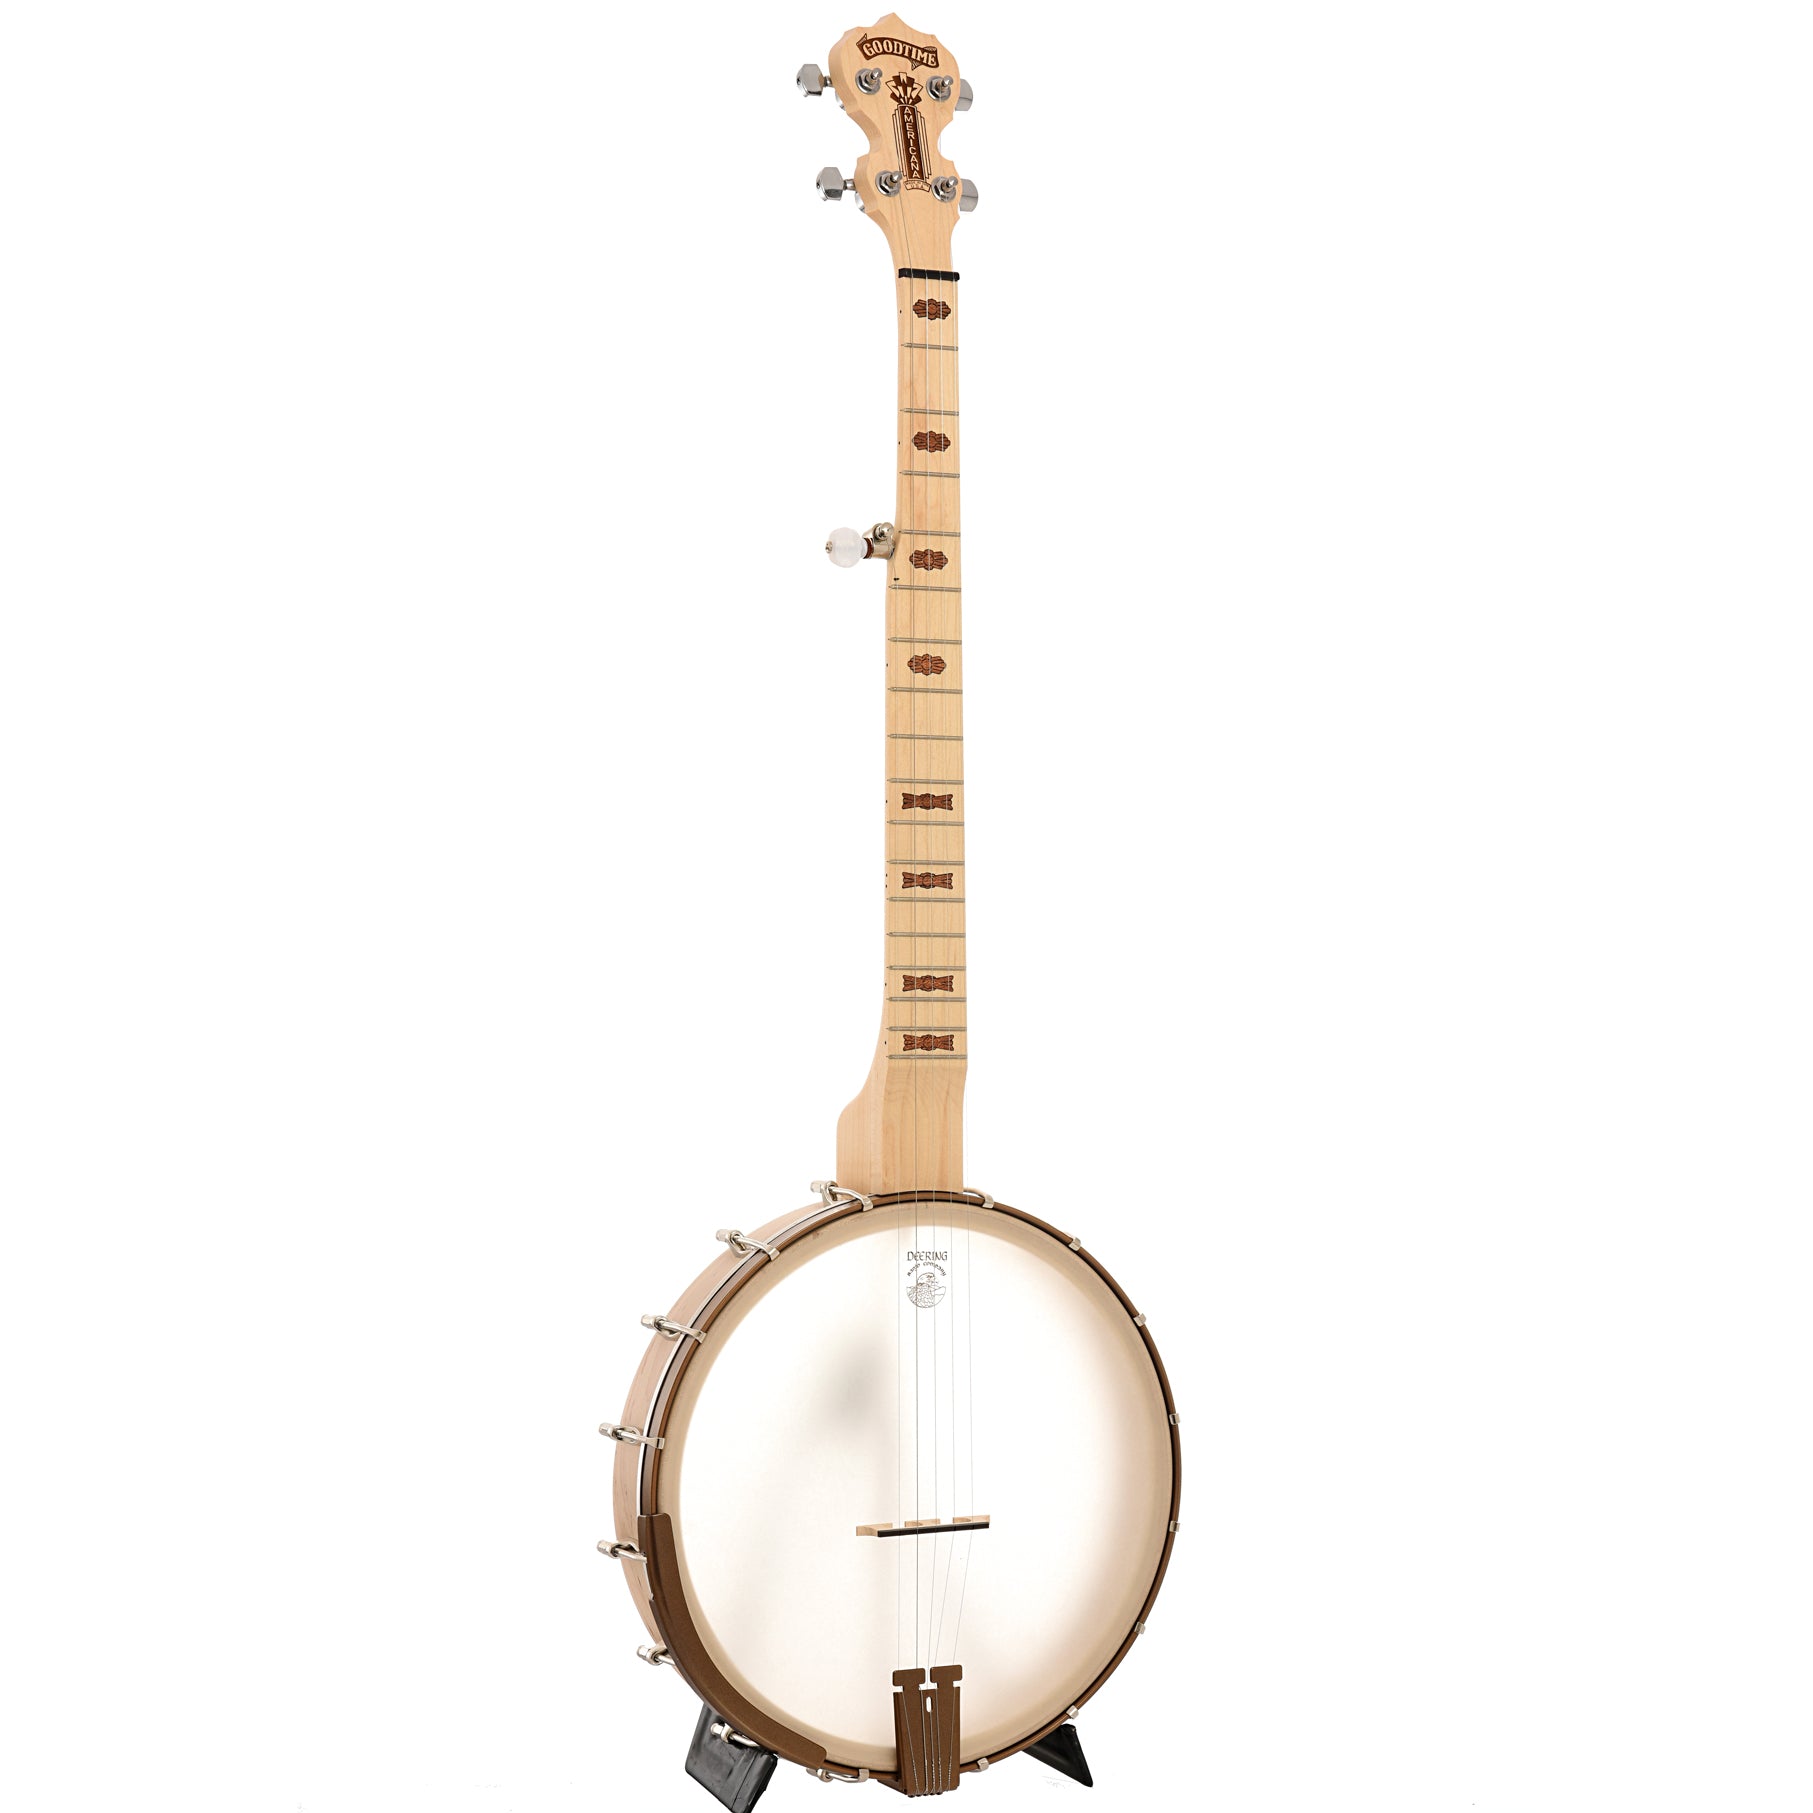 Full front and side of Deering Goodtime Americana Deco 12" Openback Banjo with Scooped Fretboard